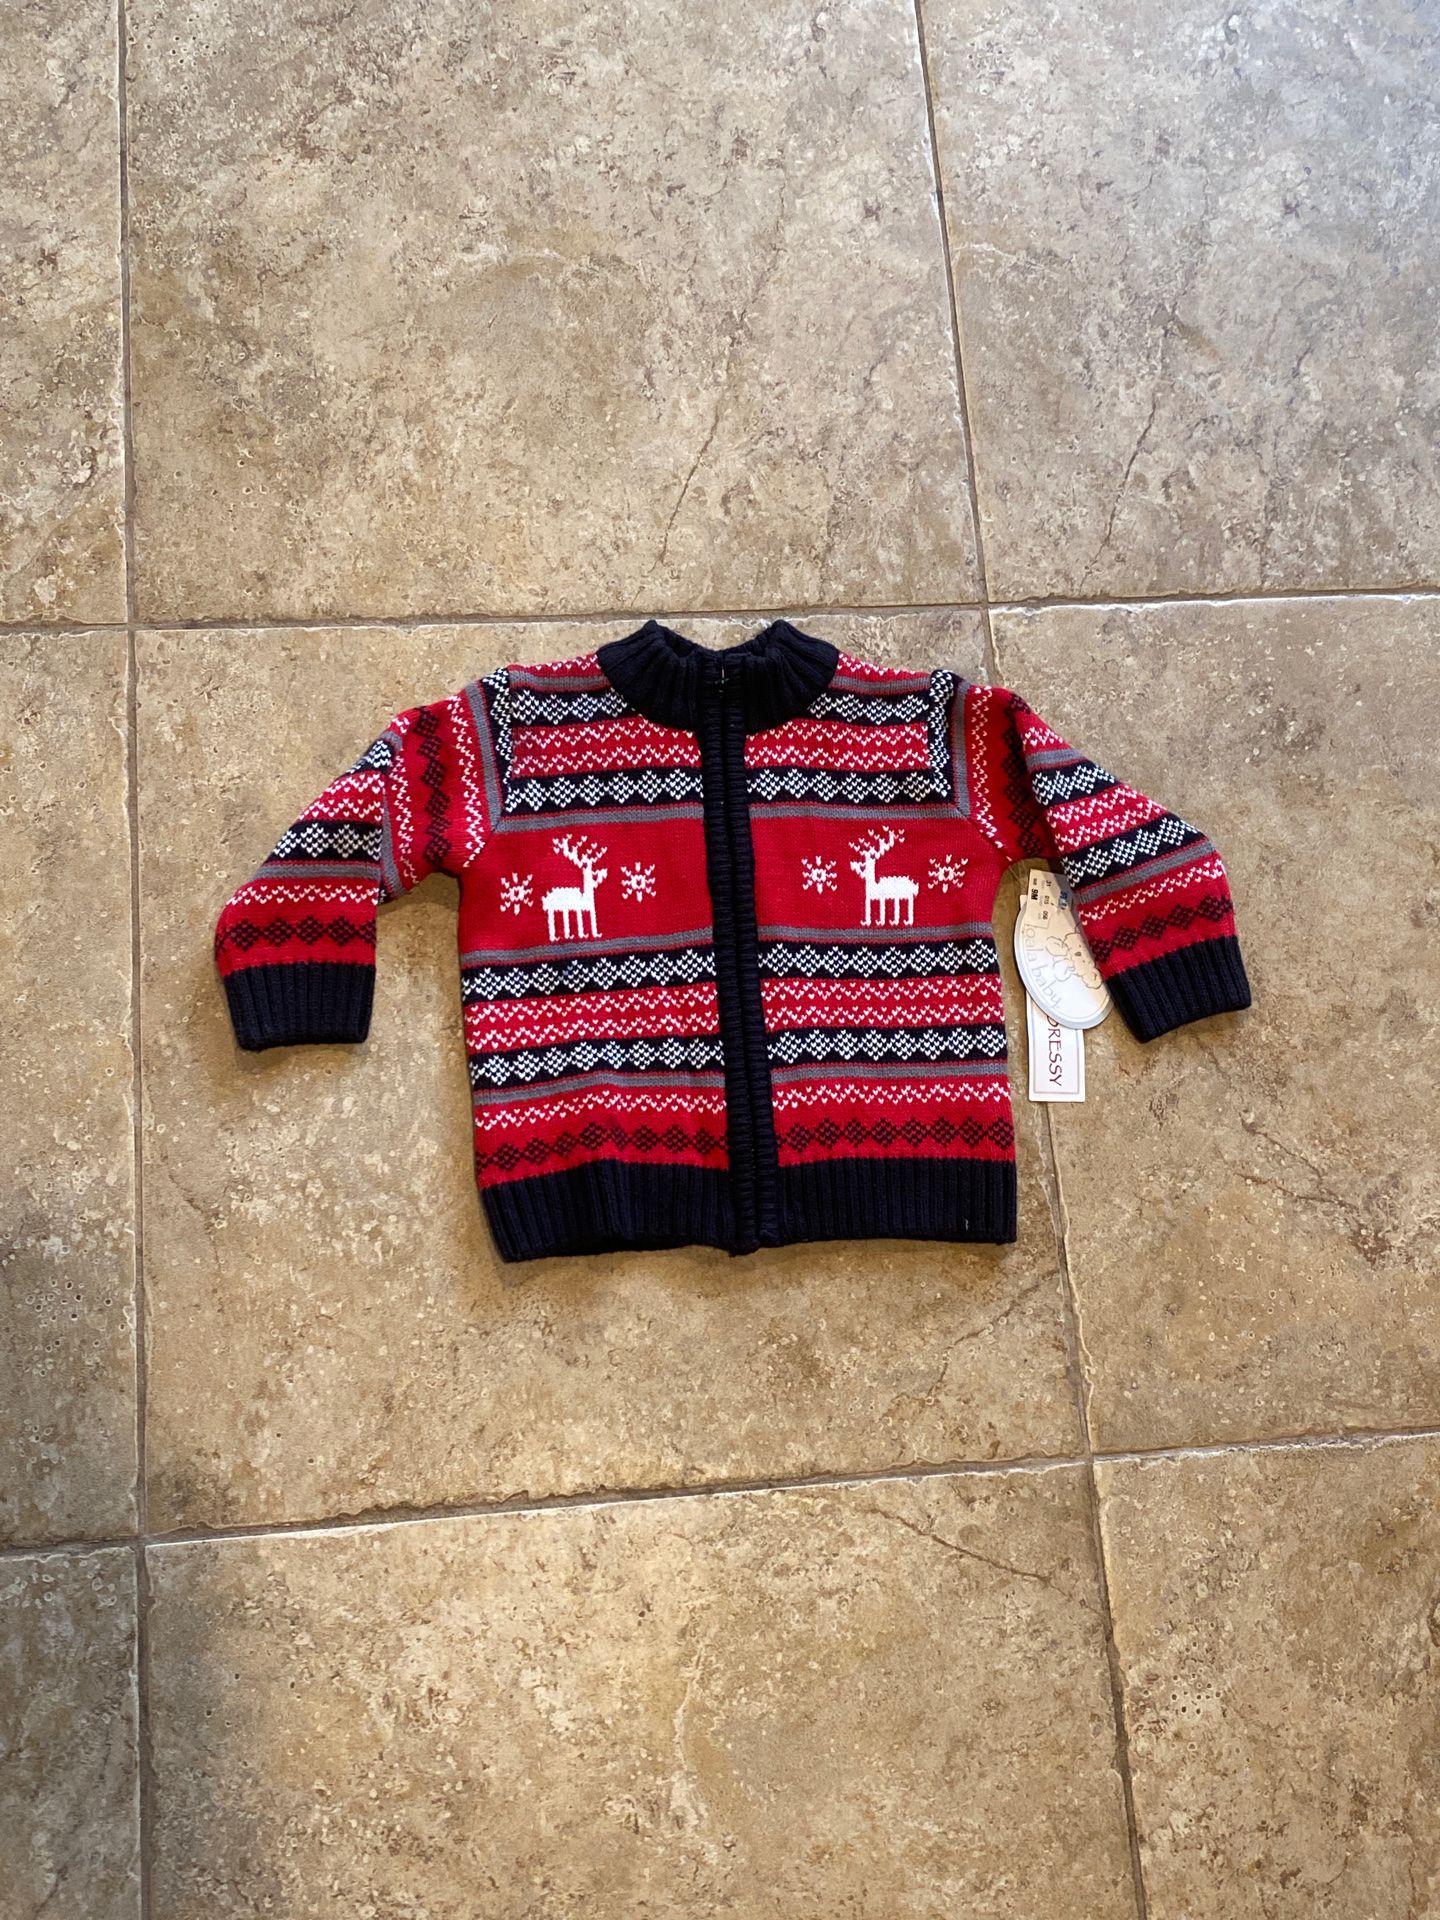 NEW WITH TAGS — Baby sweater nine 9 months Toys “R” Us koala baby holiday Christmas fall black red white thick warm kids boys girls